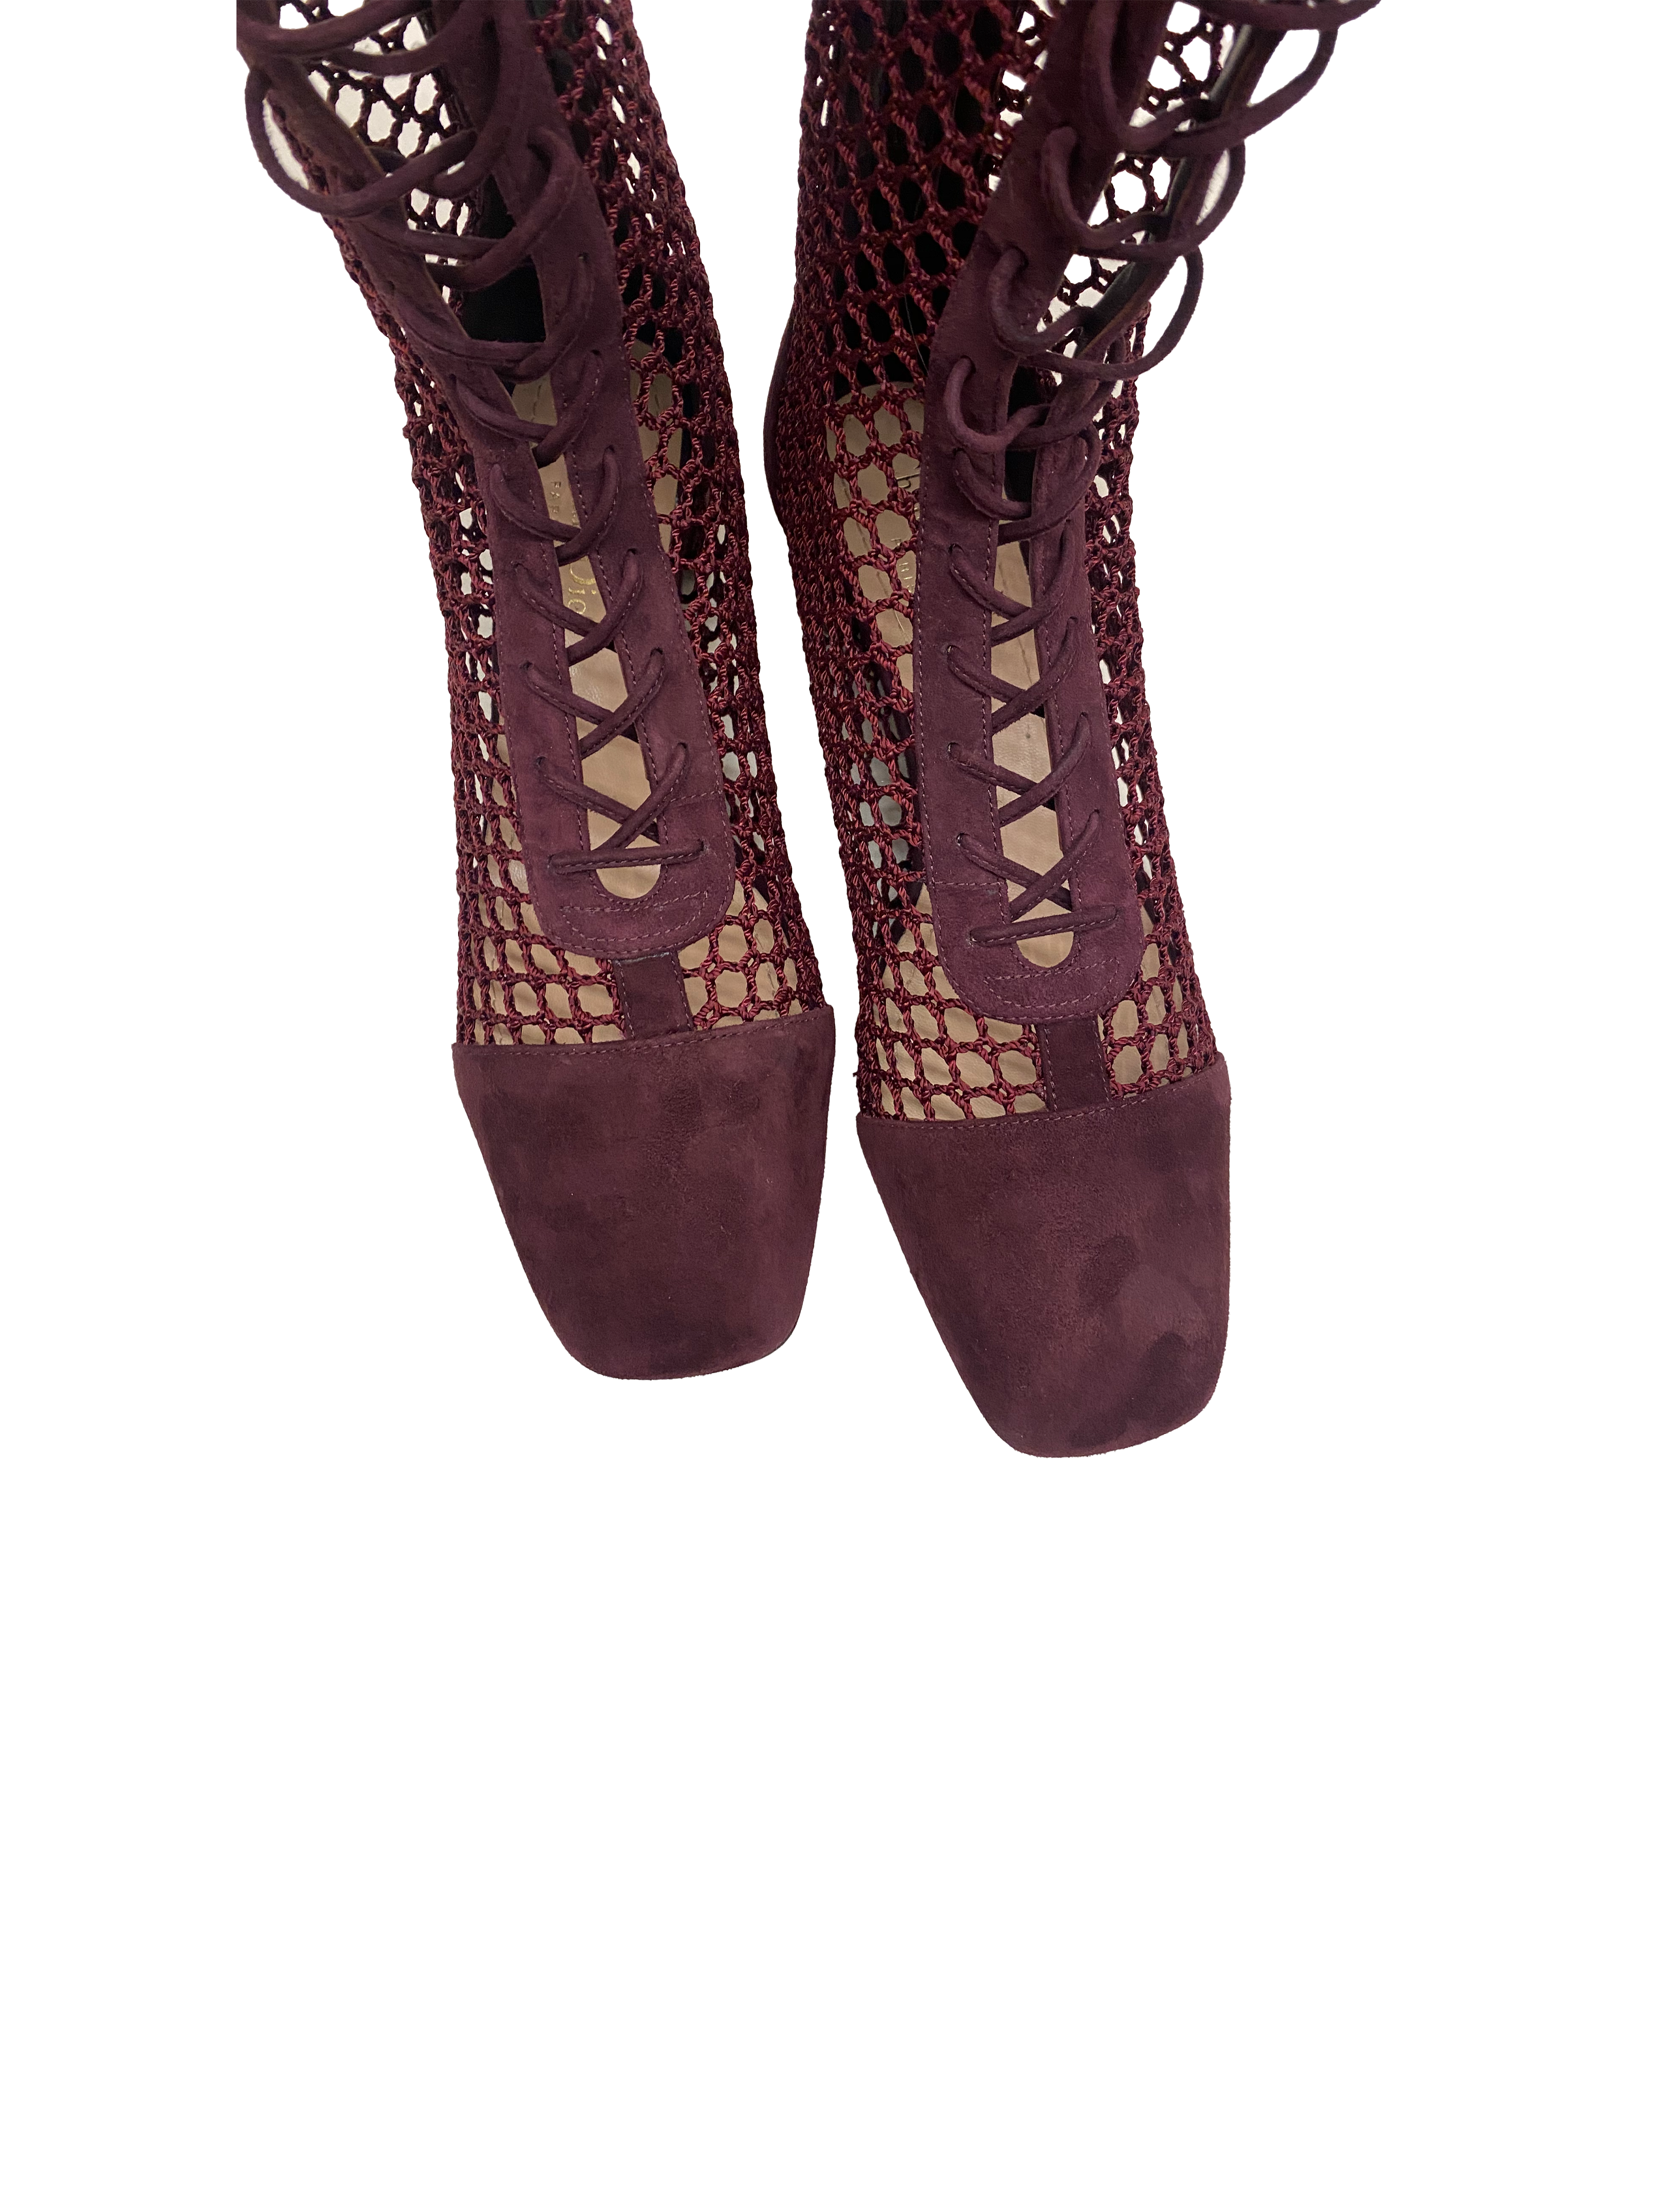 Christian Dior SS 2018 Maroon Naughtily-D Boots